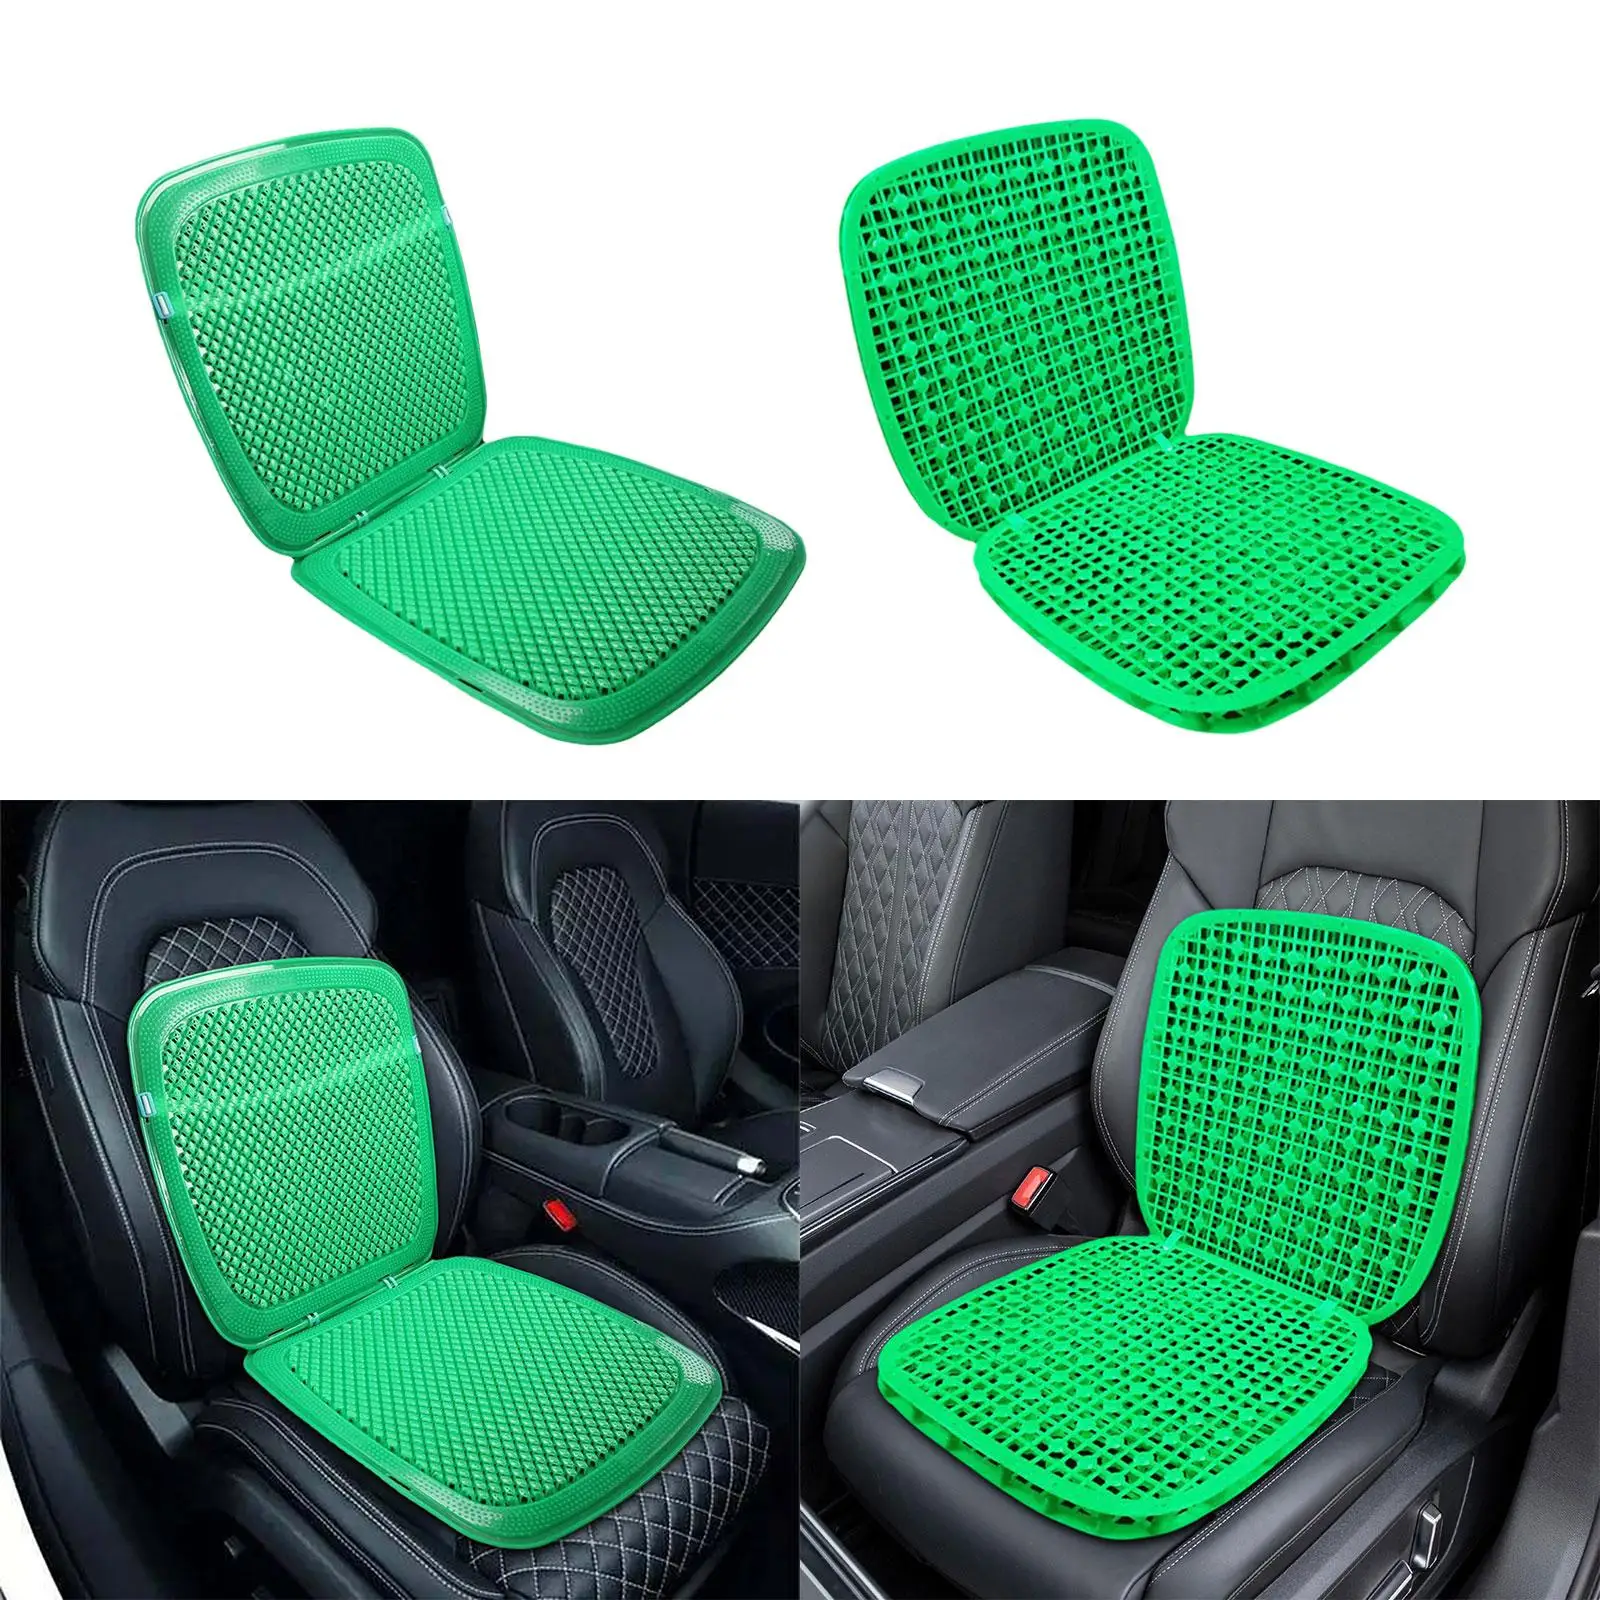 https://ae01.alicdn.com/kf/S443403fe0d4f4f30a6f6e7379ea35765Q/Car-Seat-Cushion-with-Back-Support-Seat-Cushions-Portable-for-Car-Driver-Home-Office-Chair-Truck.jpg